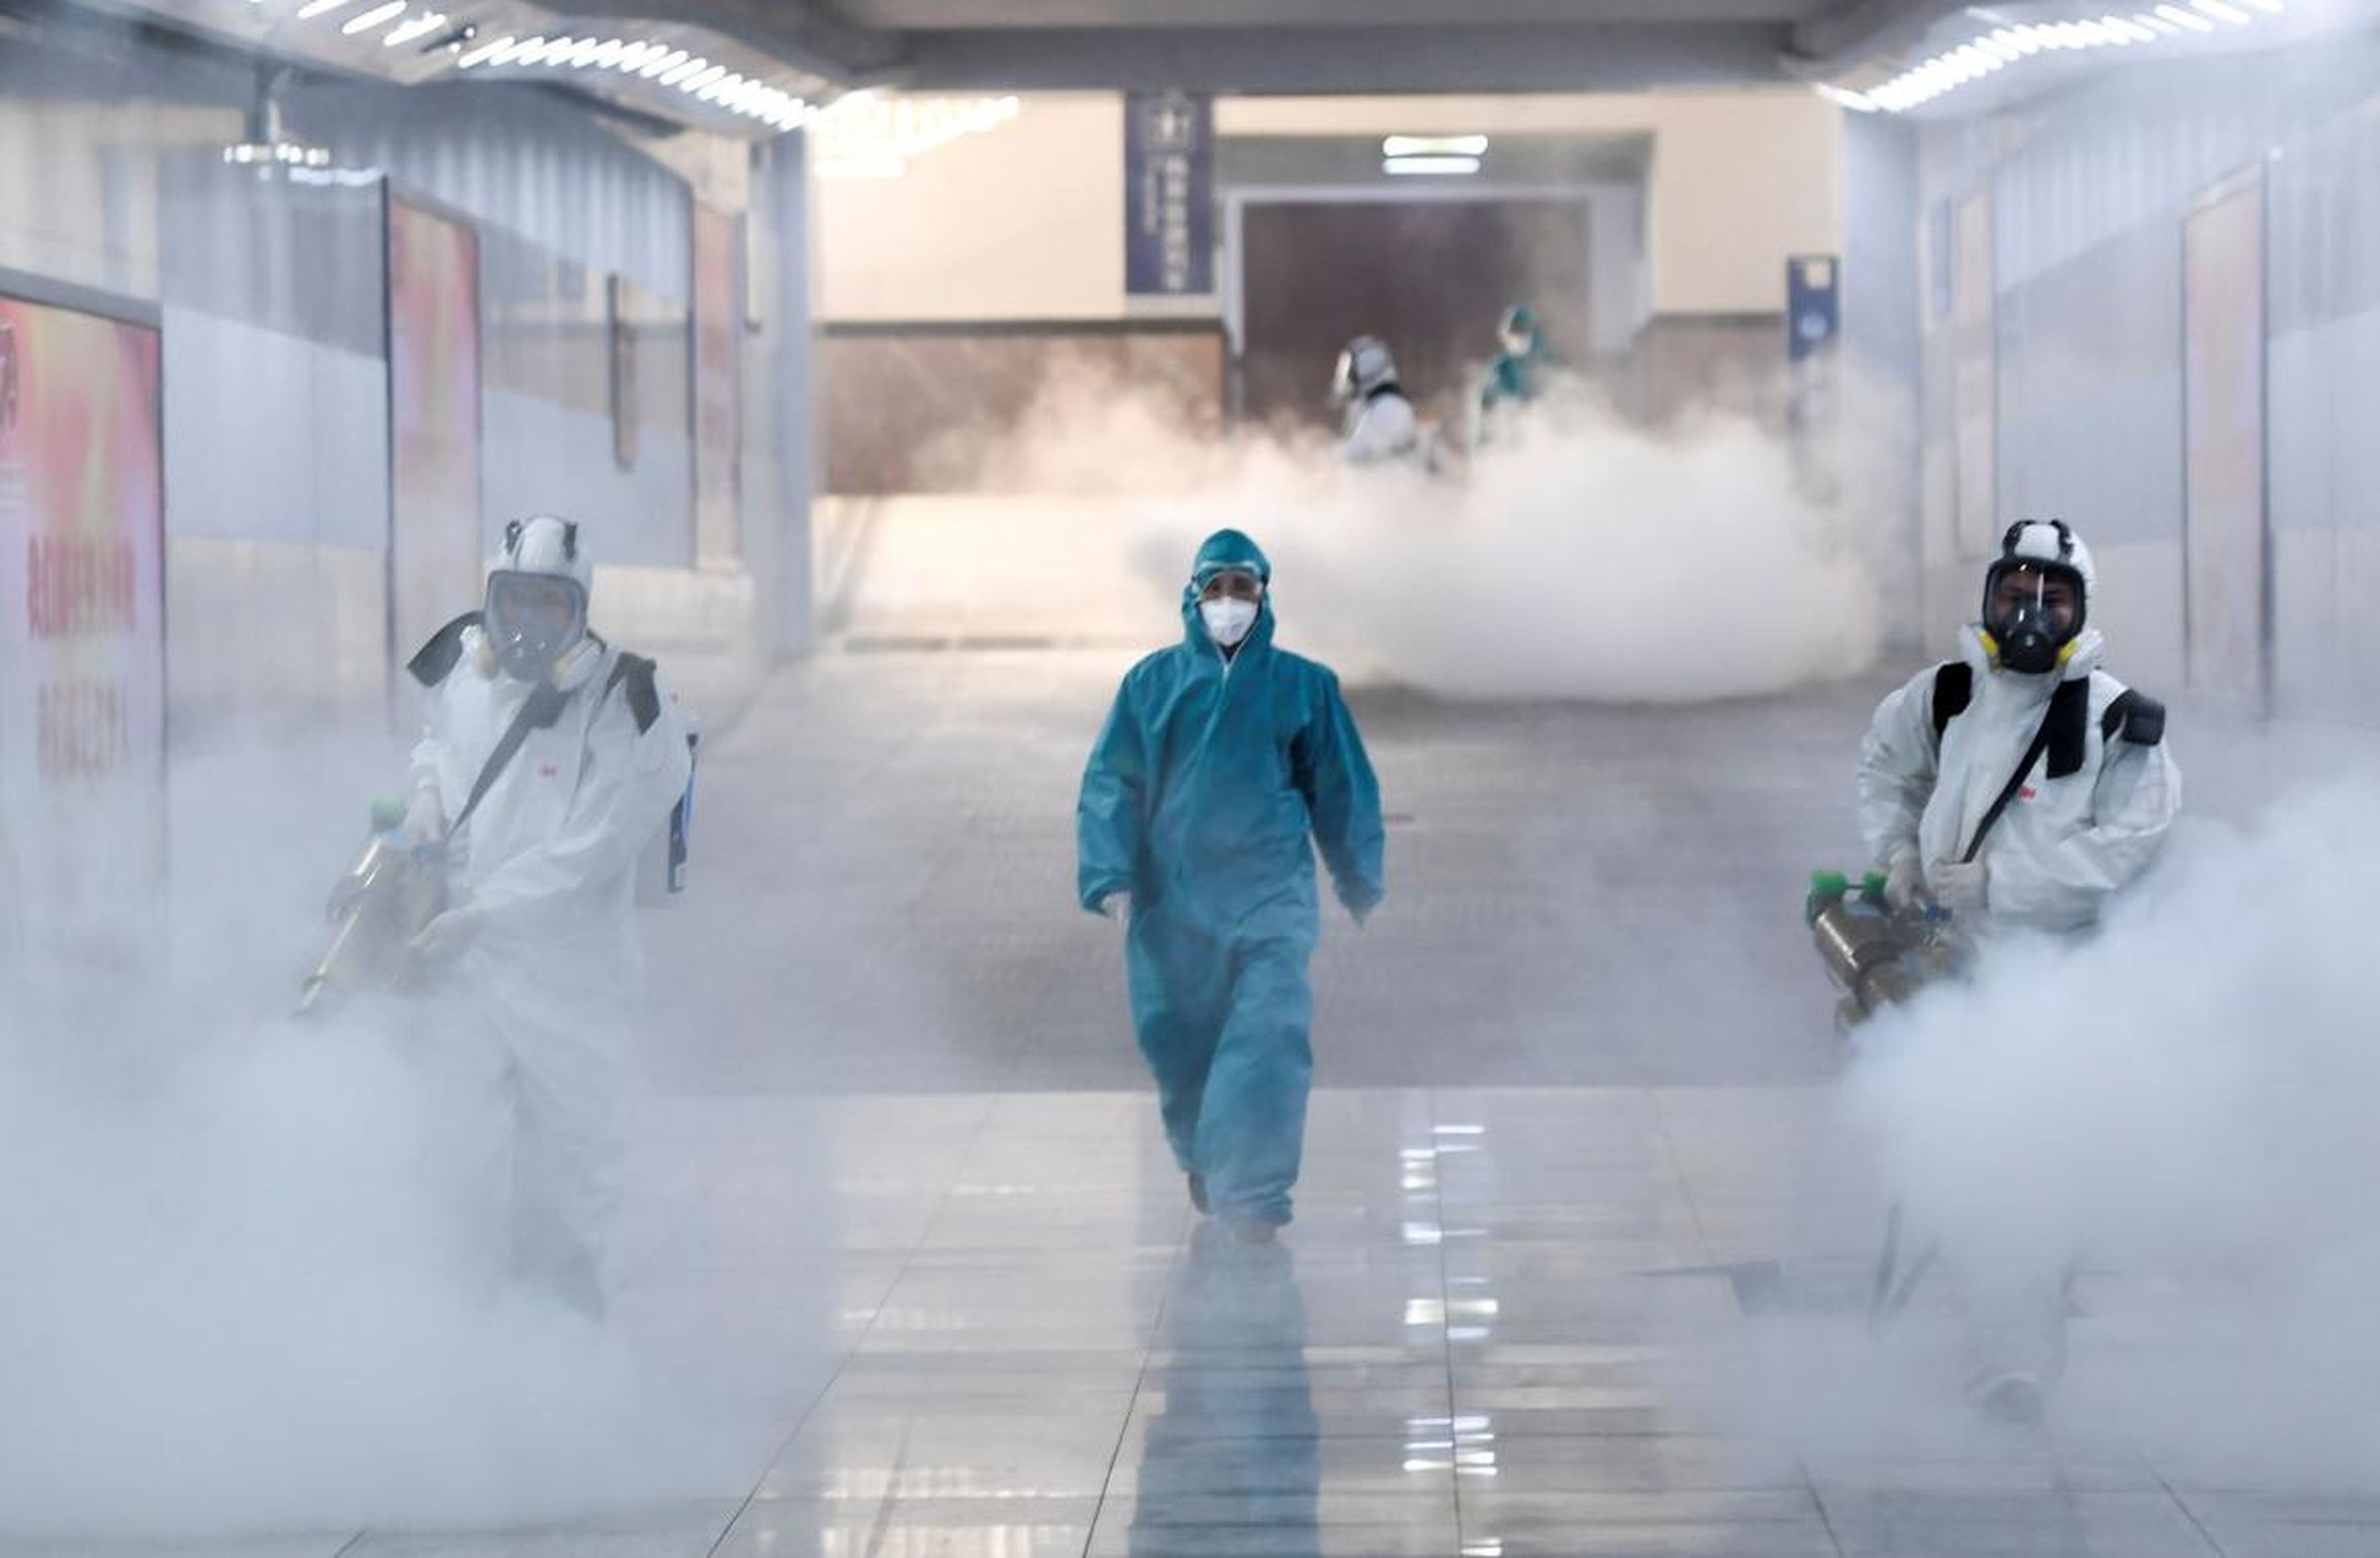 Volunteers in protective suits disinfect a railway station as the country is hit by an outbreak of the new coronavirus, in Changsha, Hunan province, China February 4, 2020.